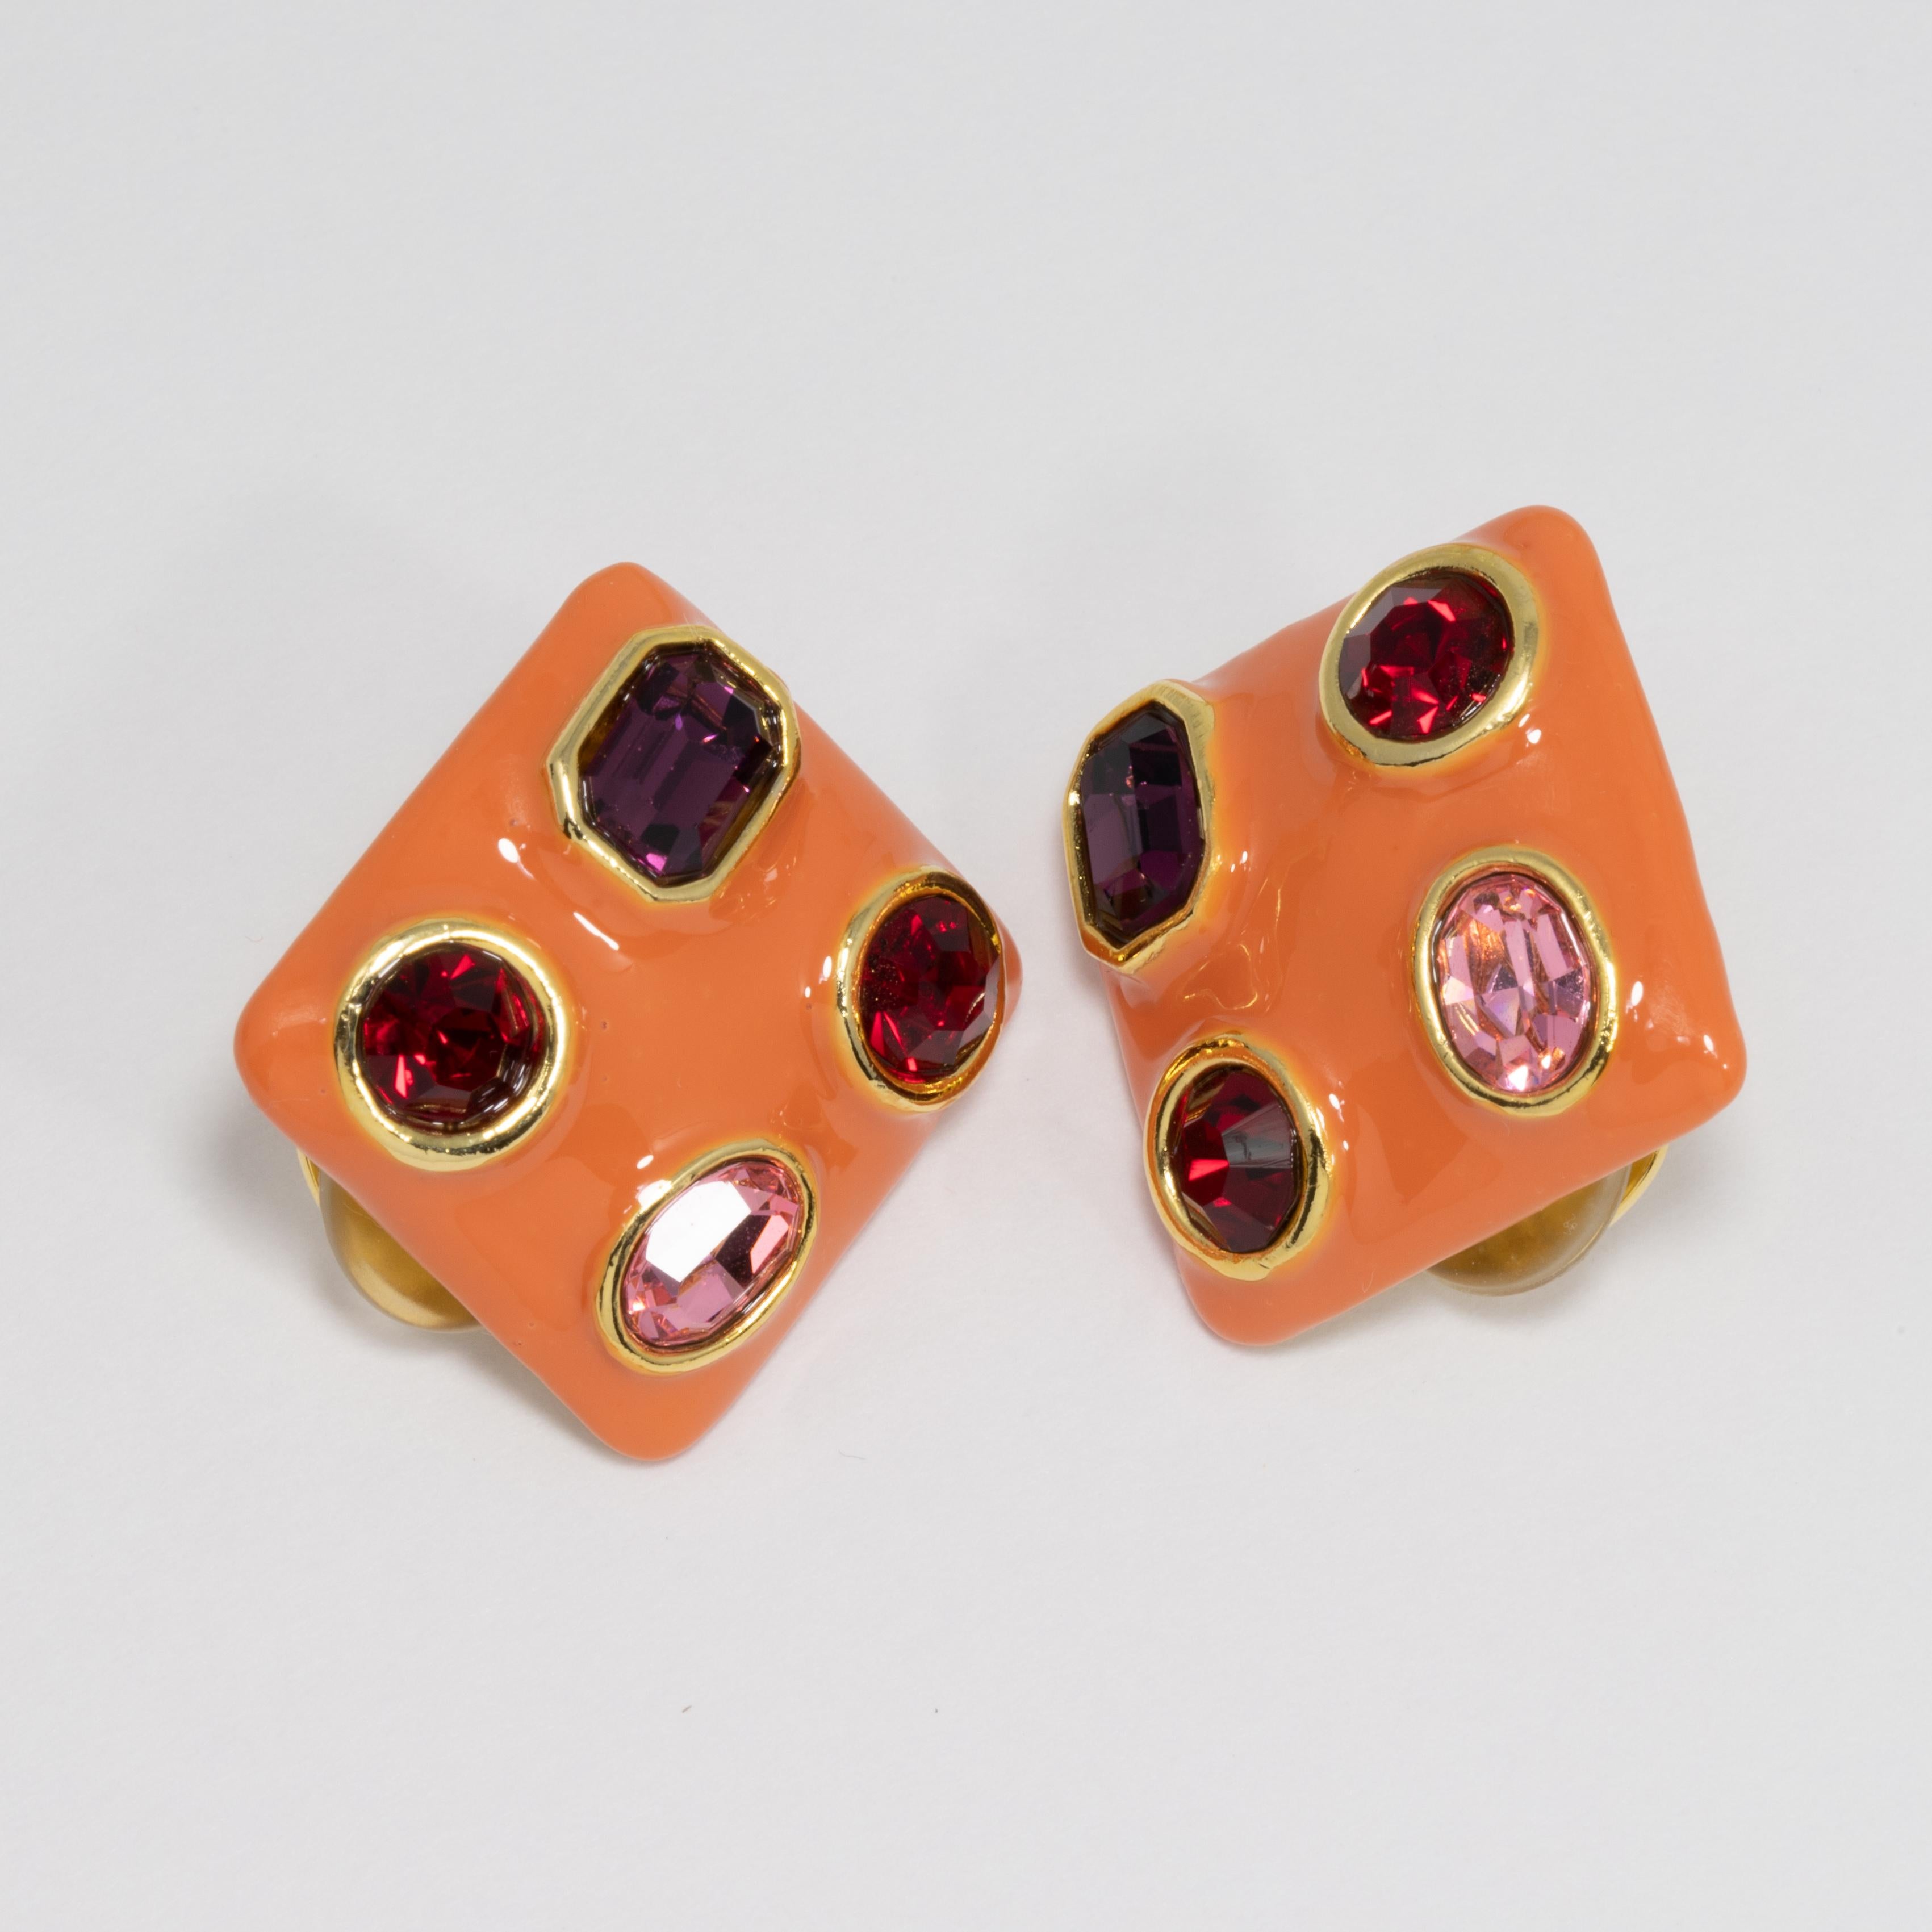 Stylish Kenneth Jay Lane earrings, featuring rose, amethyst, and ruby crystals bezel set ina orange enamel square clip on earrings.

Hallmarks: KJL, Made in USA